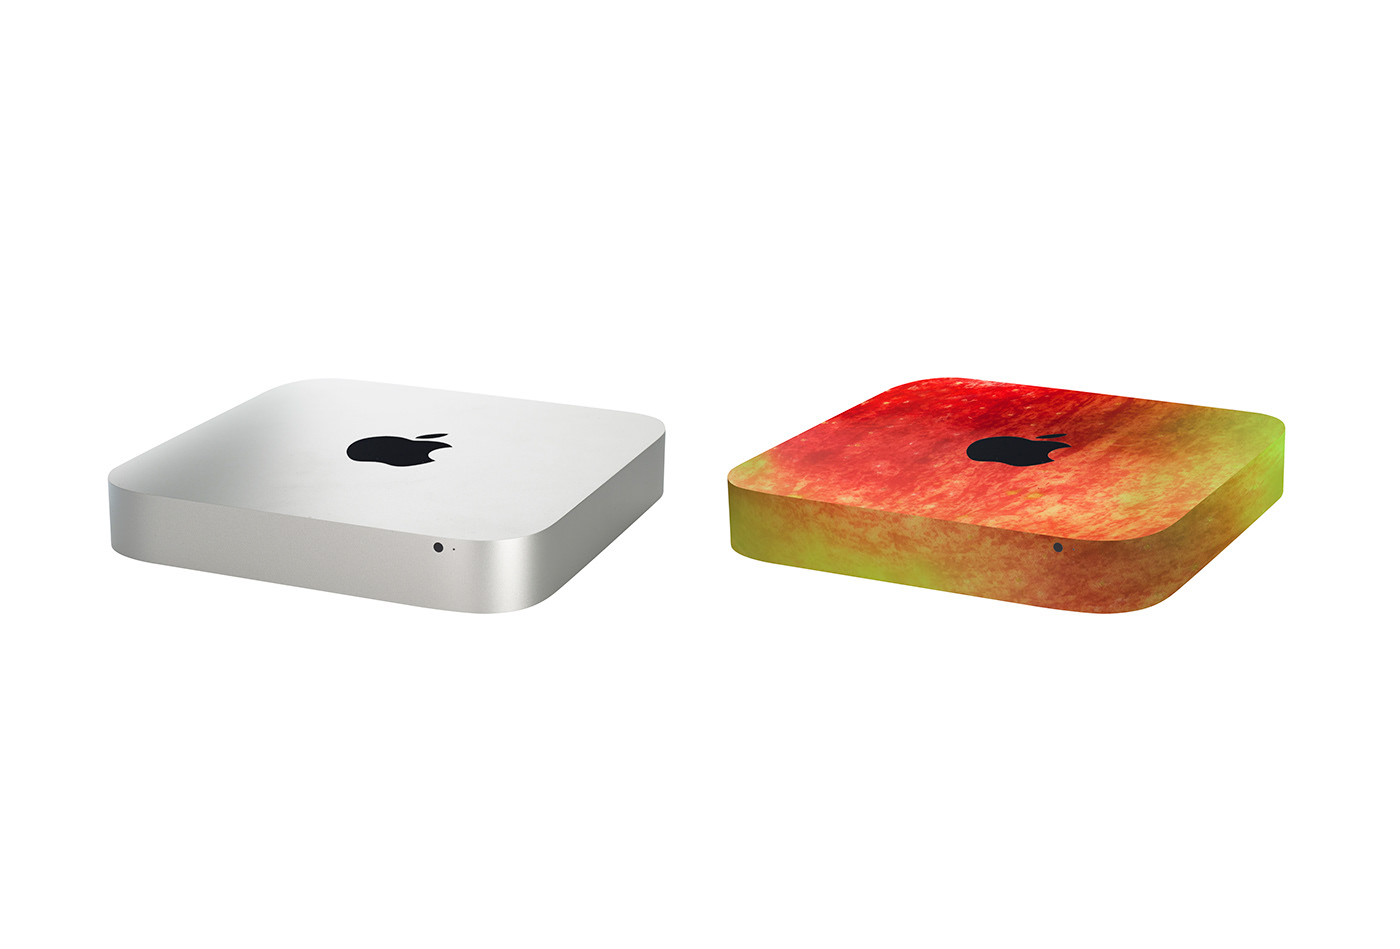 Apple colors apple design apple products apples applied colors colorways appled